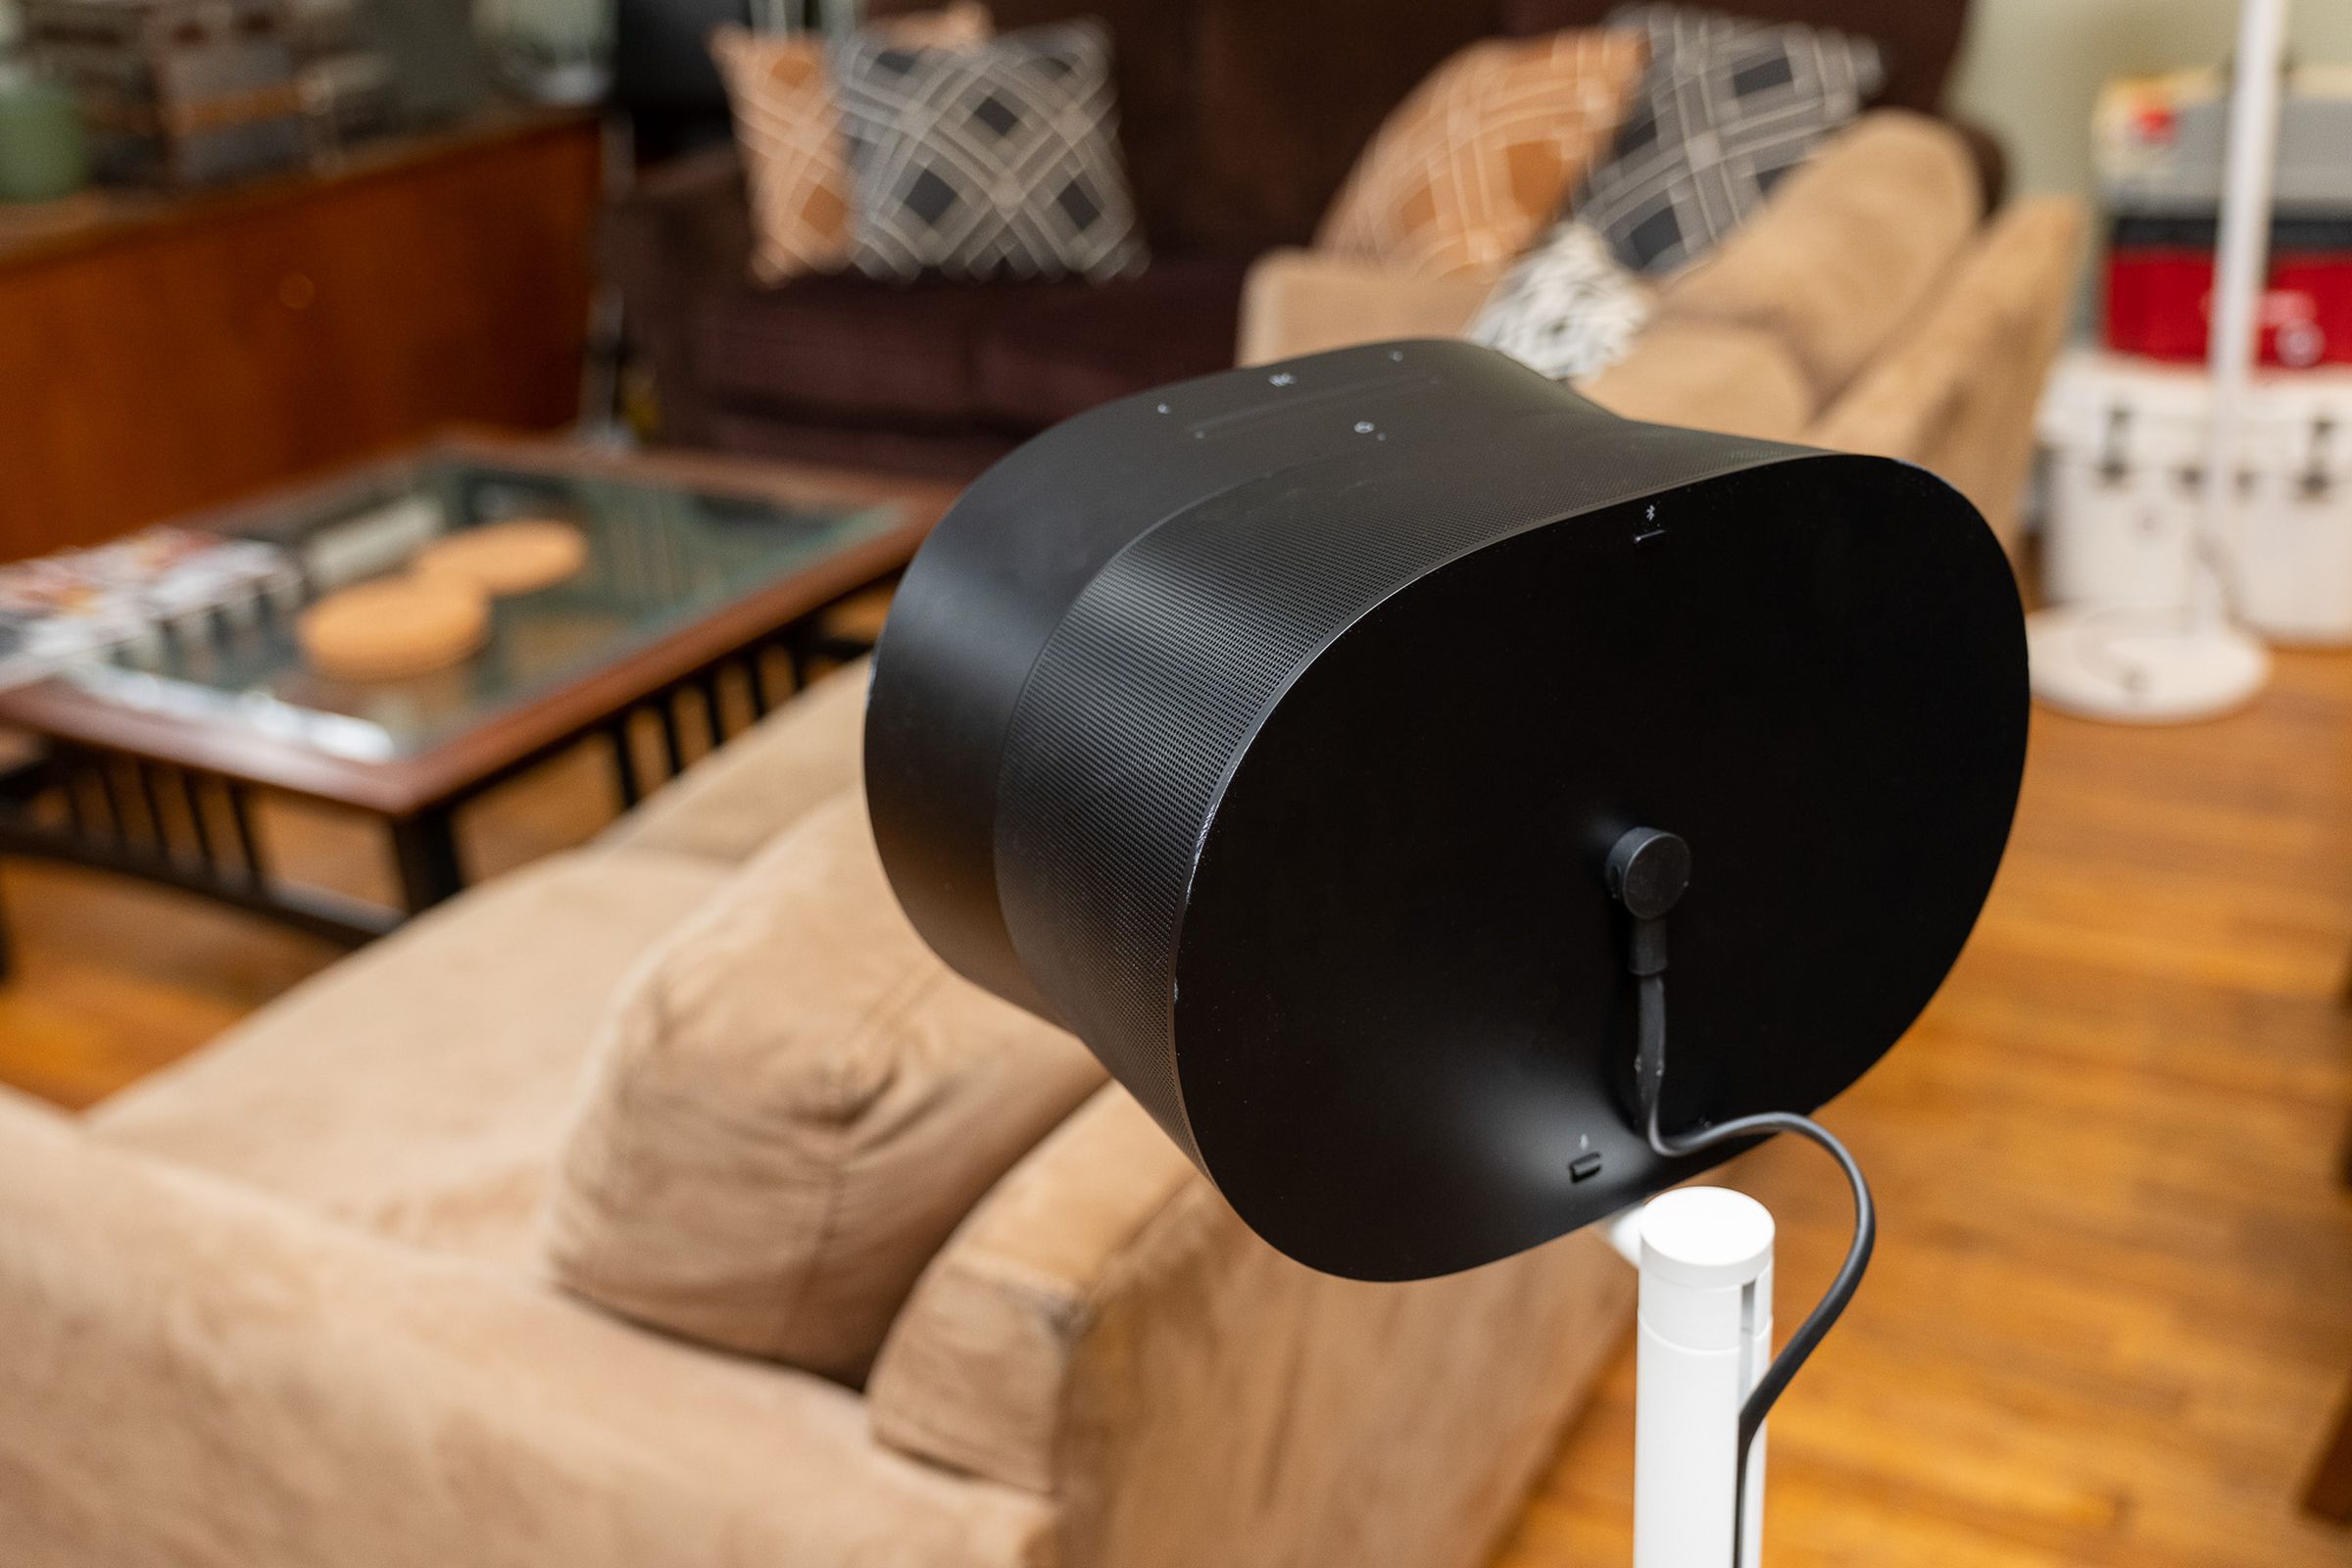 A photo of the Sonos Era 300 speaker on a stand.